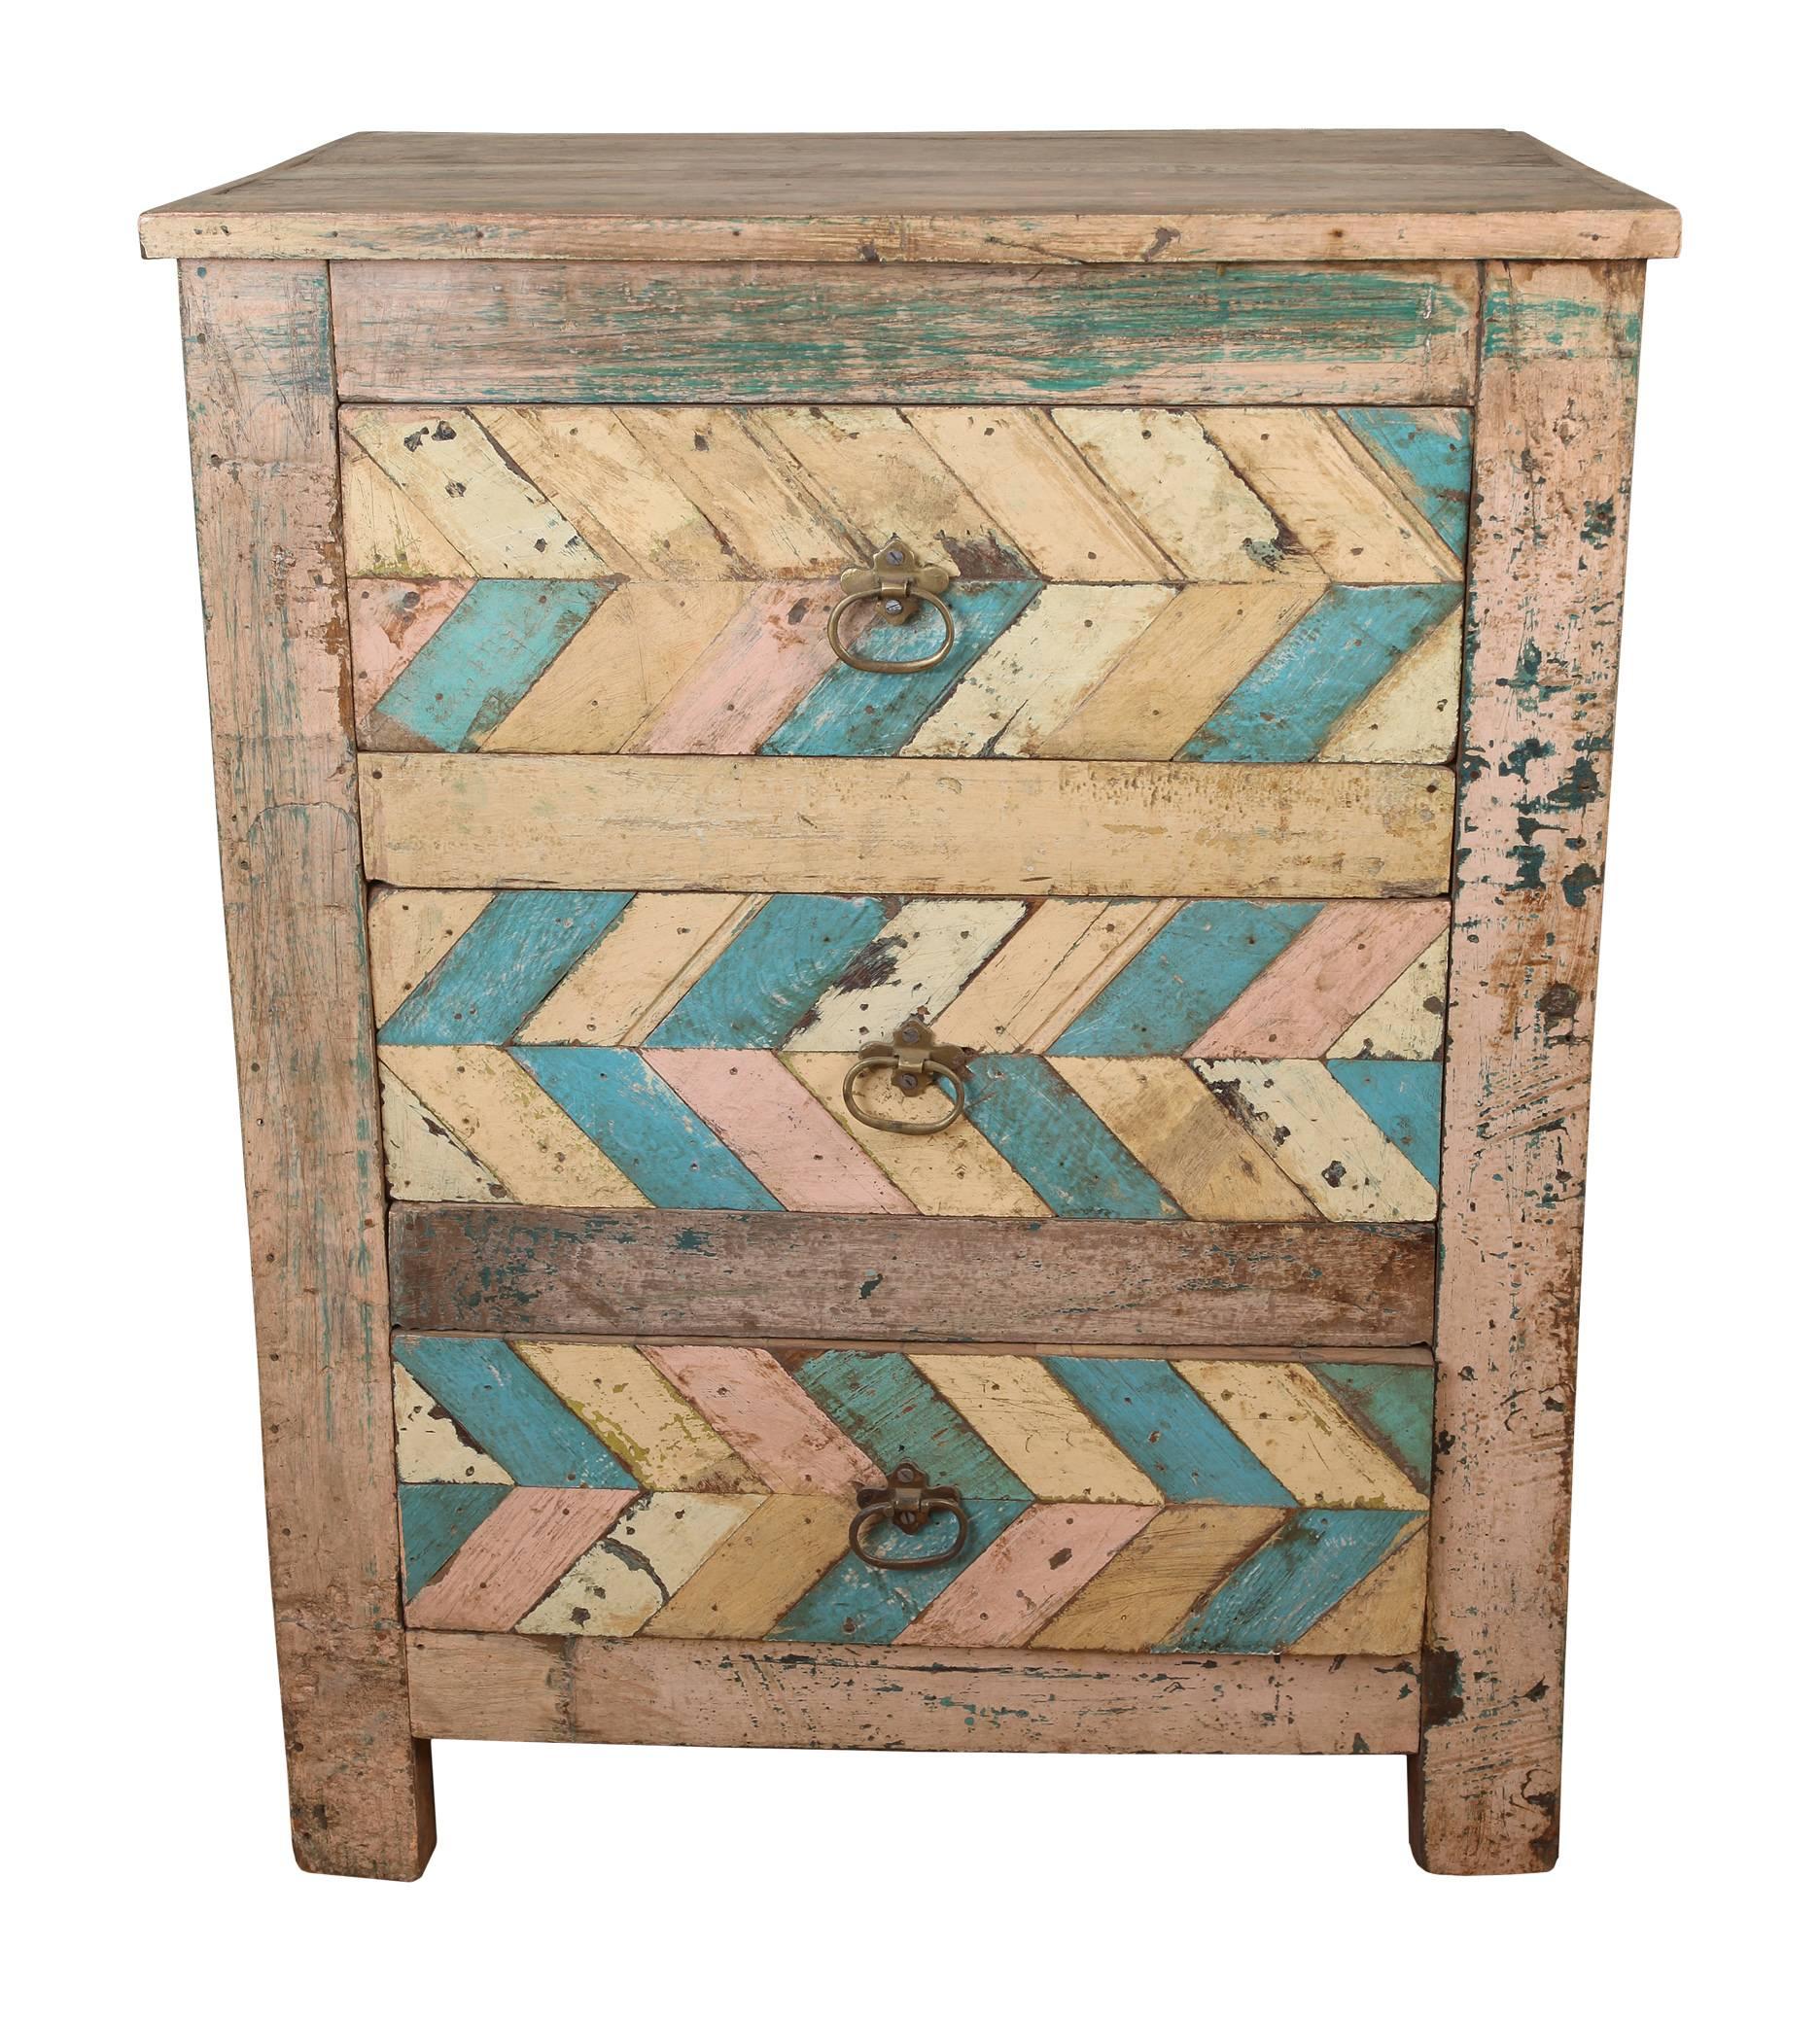 Not twins, more like sisters or cousins, a pair of reclaimed wood side table cabinets one with door front and interior shelf and the other with three drawers. Late 1800 architectural fragments, modernly re-repurposed. Brass hardware.